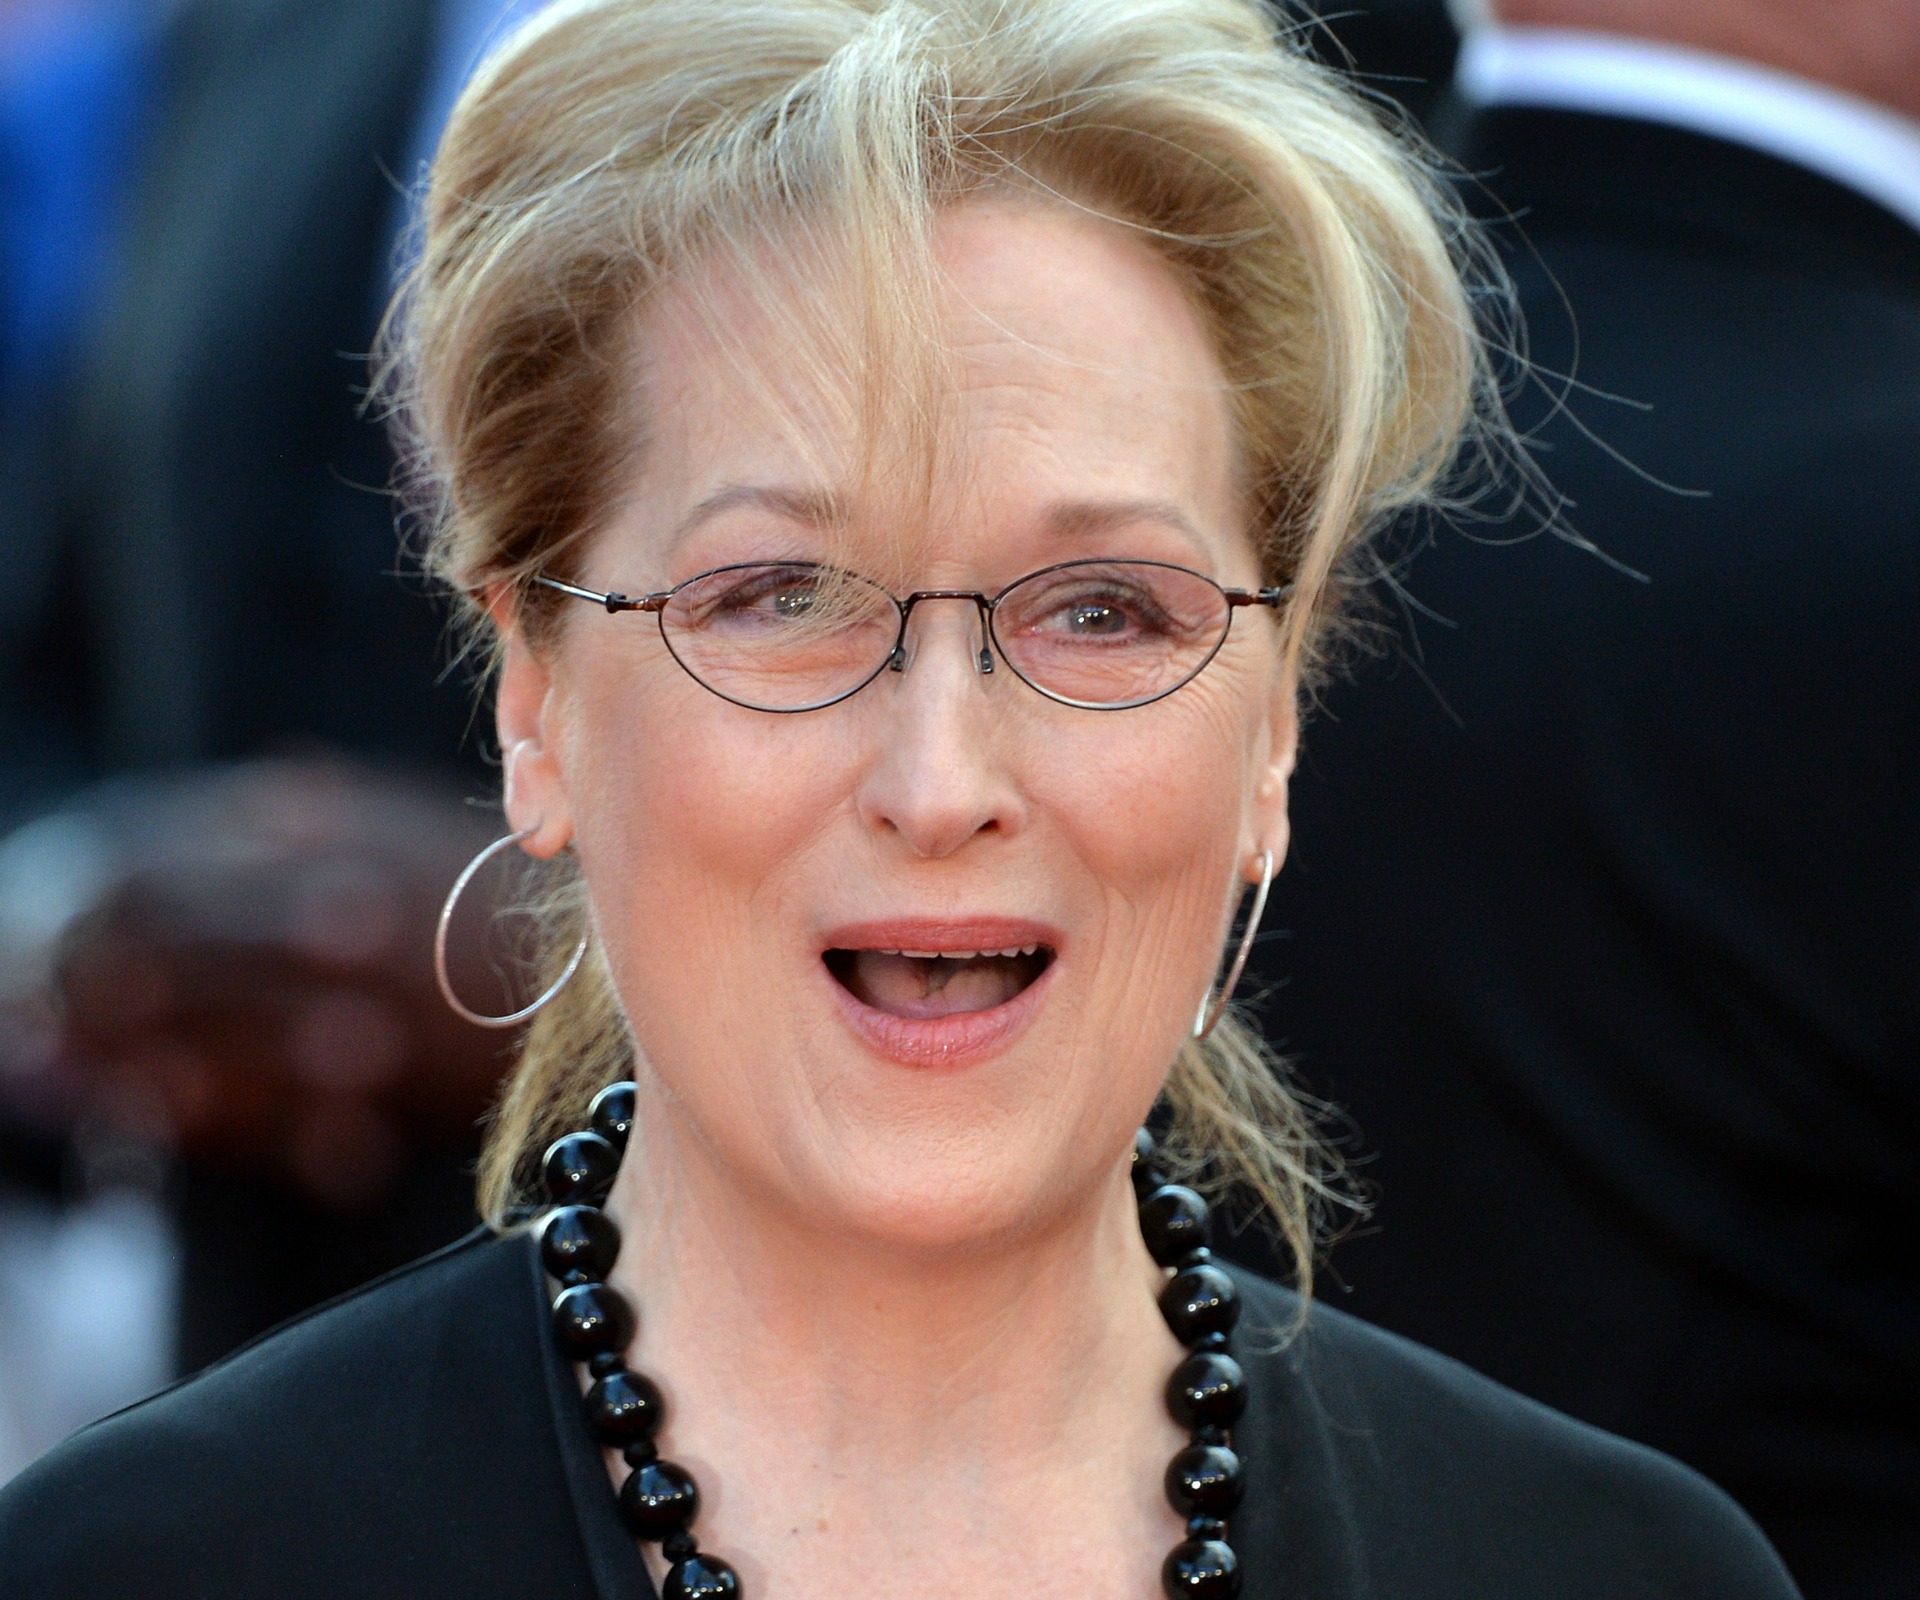 Meryl Streep’s star struck first encounter with Al Pacino: “It was awful”